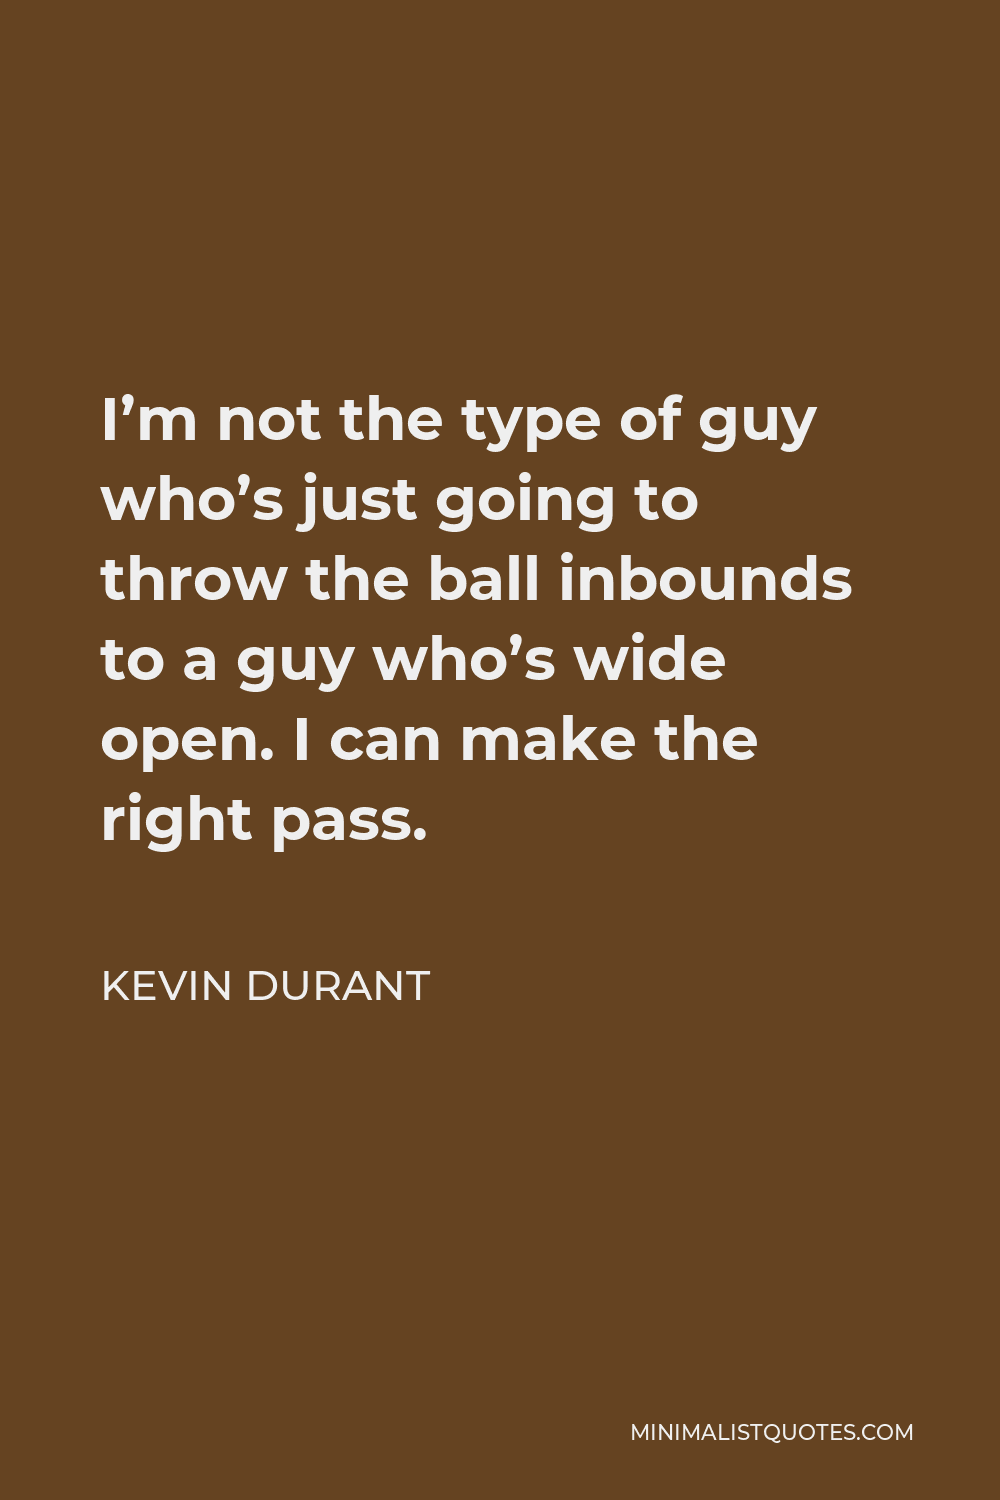 Kevin Durant Quote - I’m not the type of guy who’s just going to throw the ball inbounds to a guy who’s wide open. I can make the right pass.